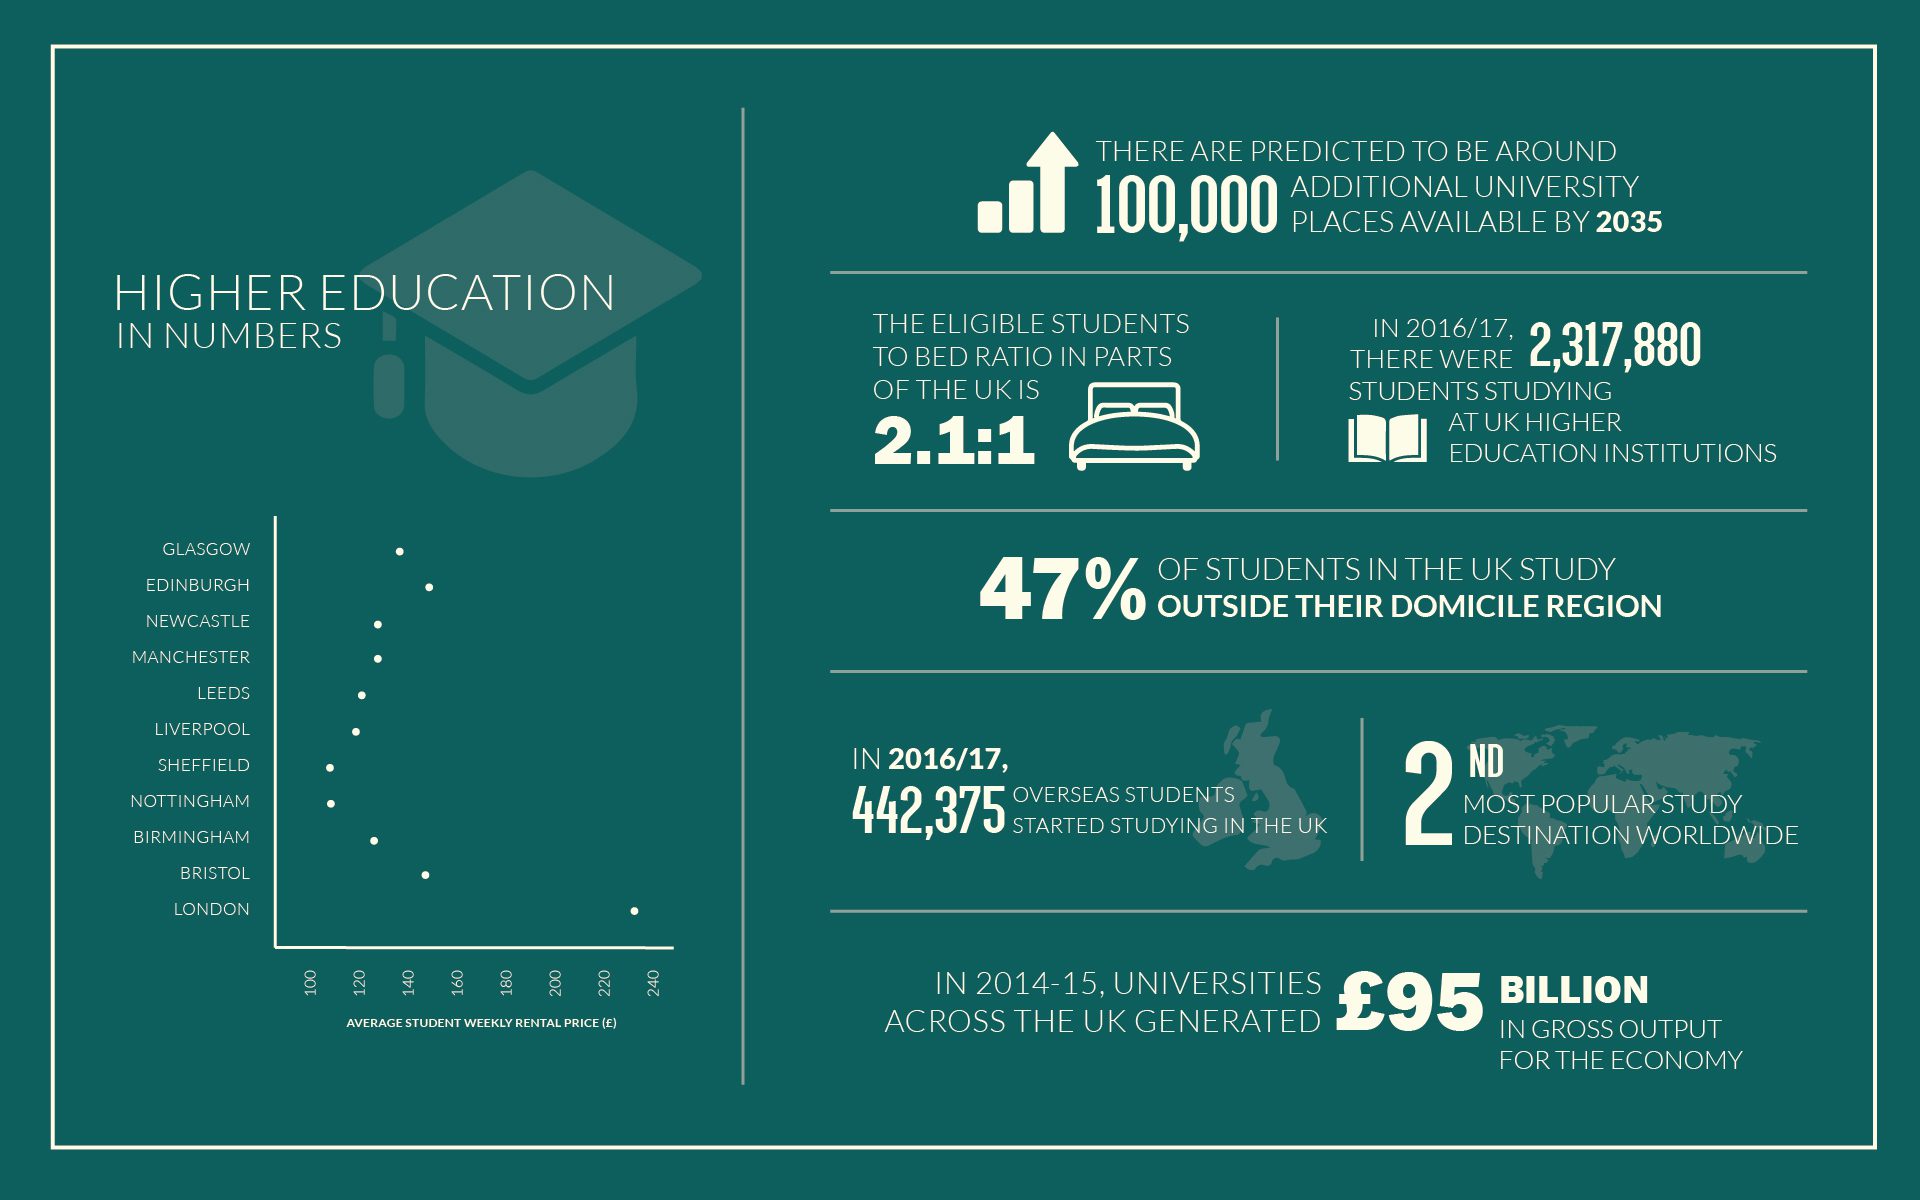 UK Higher Education in Numbers infographic